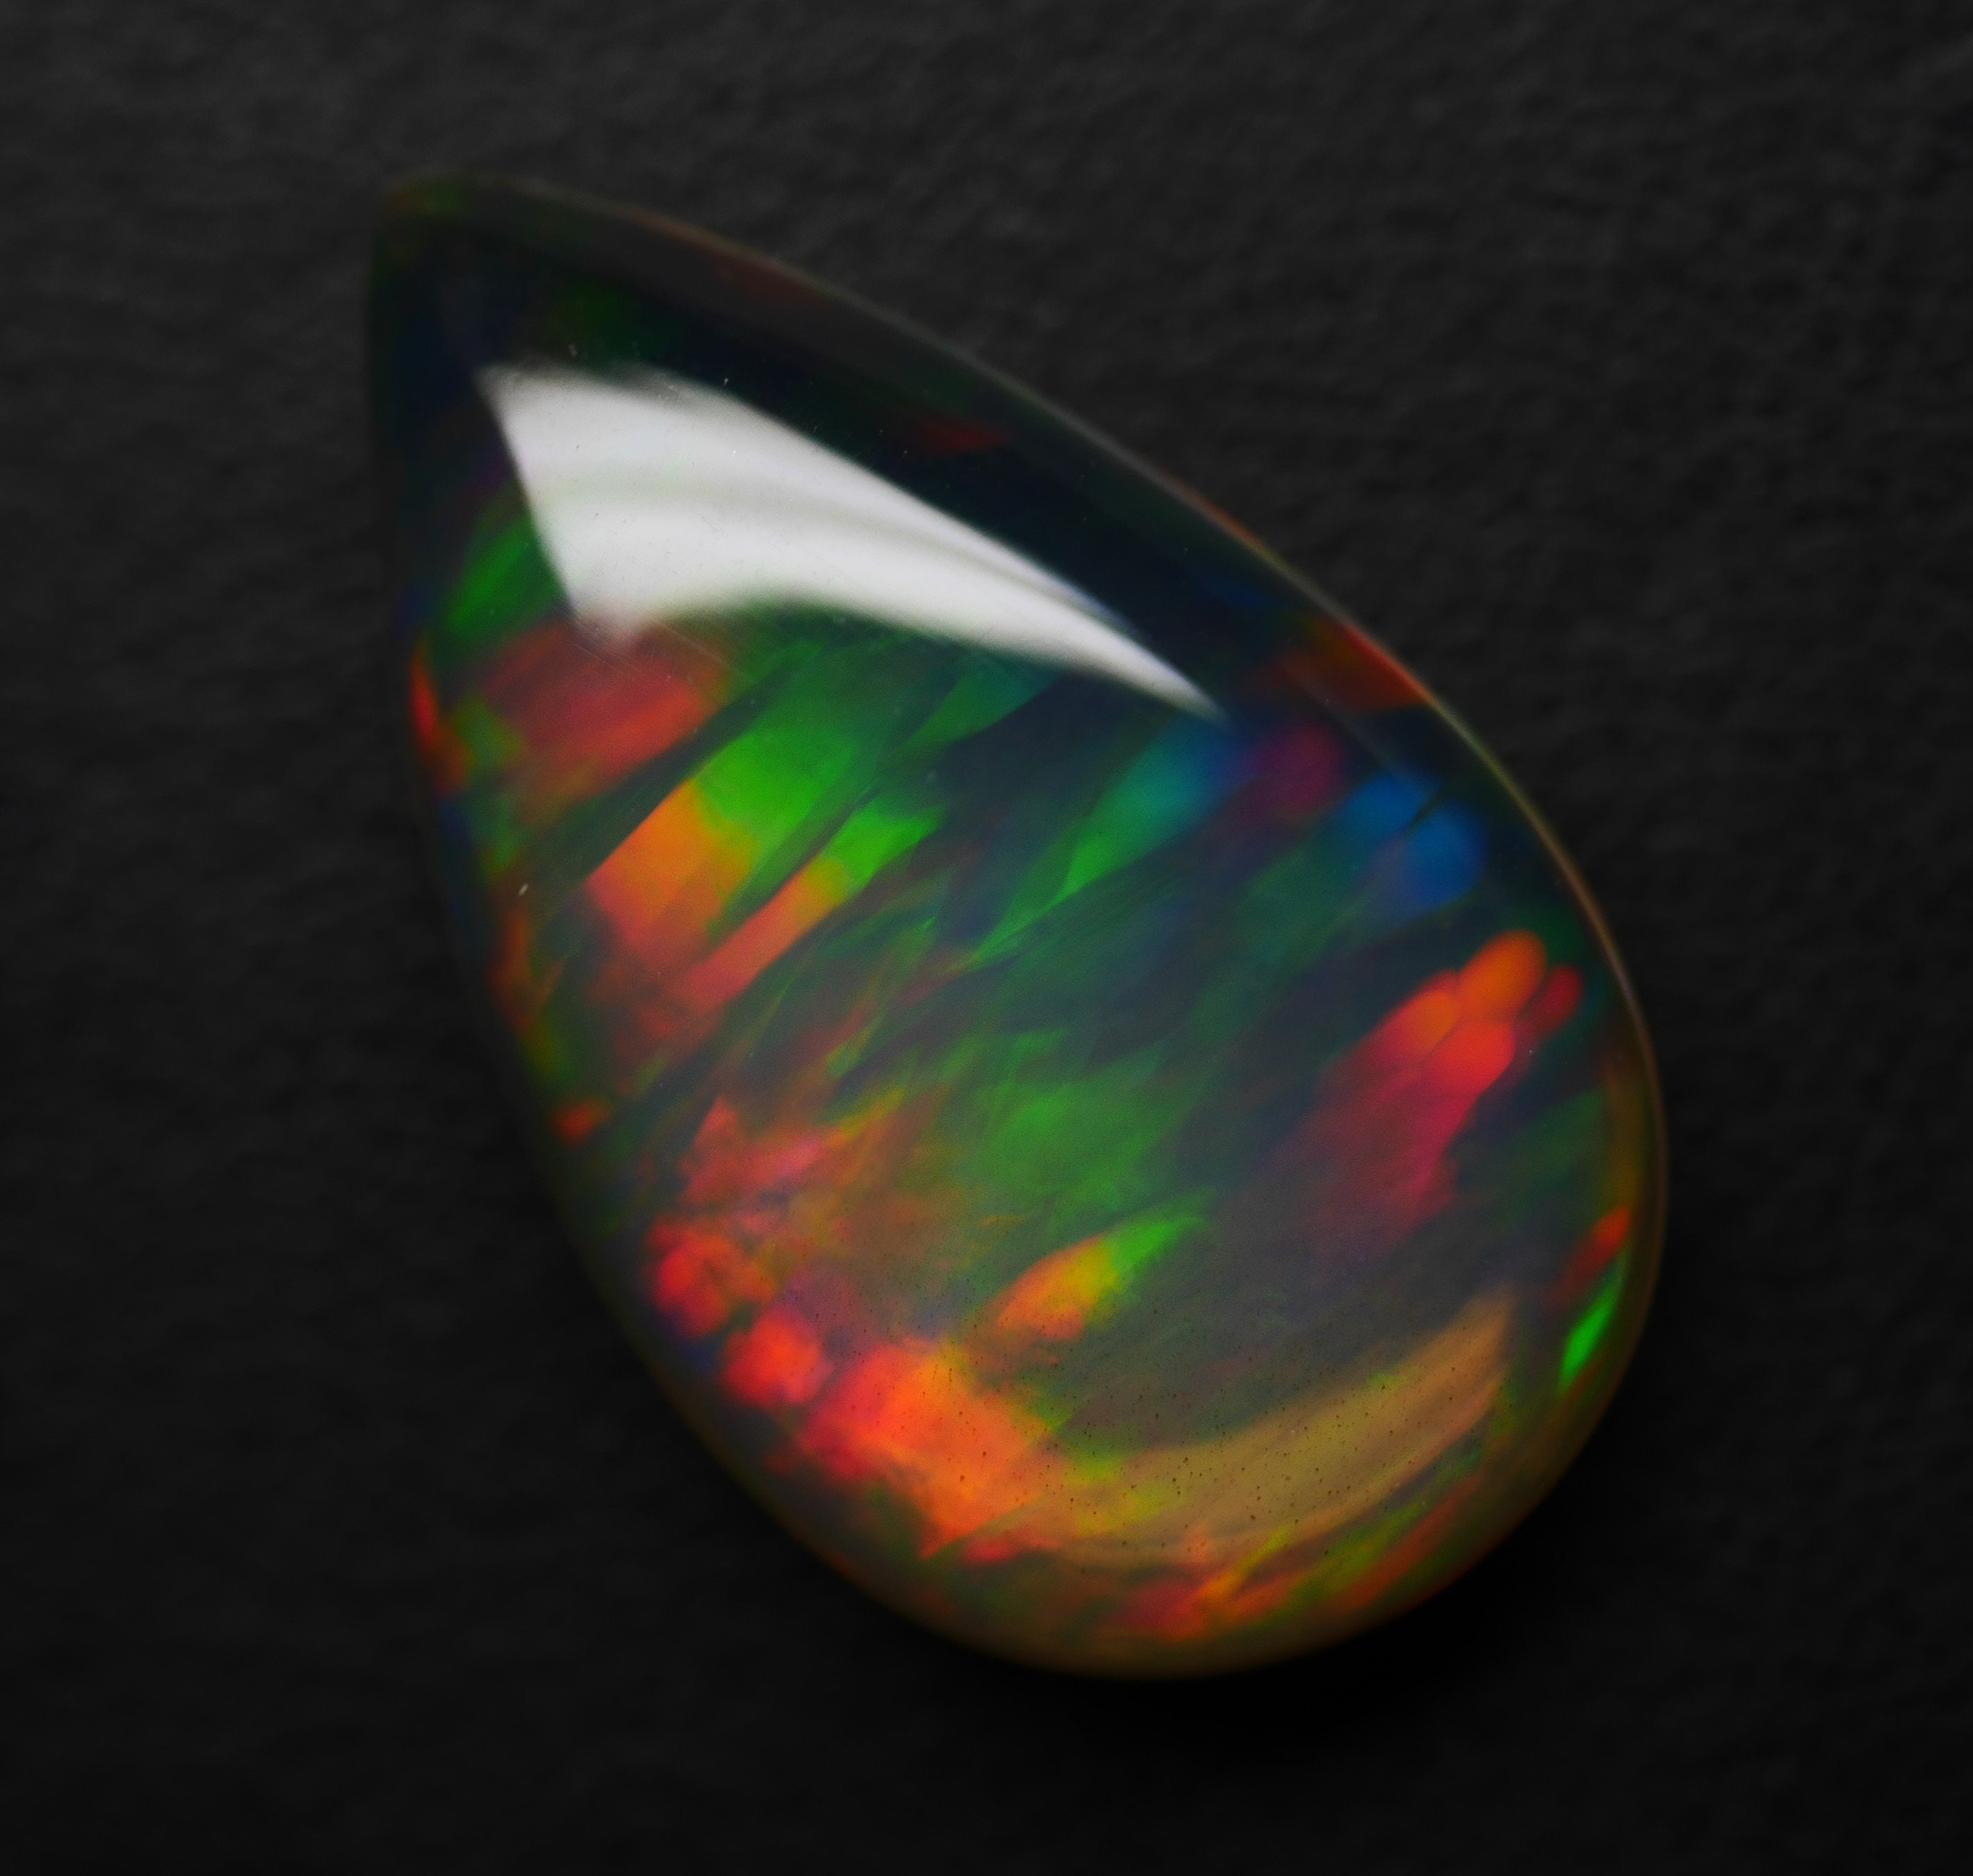 11x13.7 MM Size Brilliant Natural Ethiopian Opal Oval Cabochon Welo Multy Flashy Fire Opal